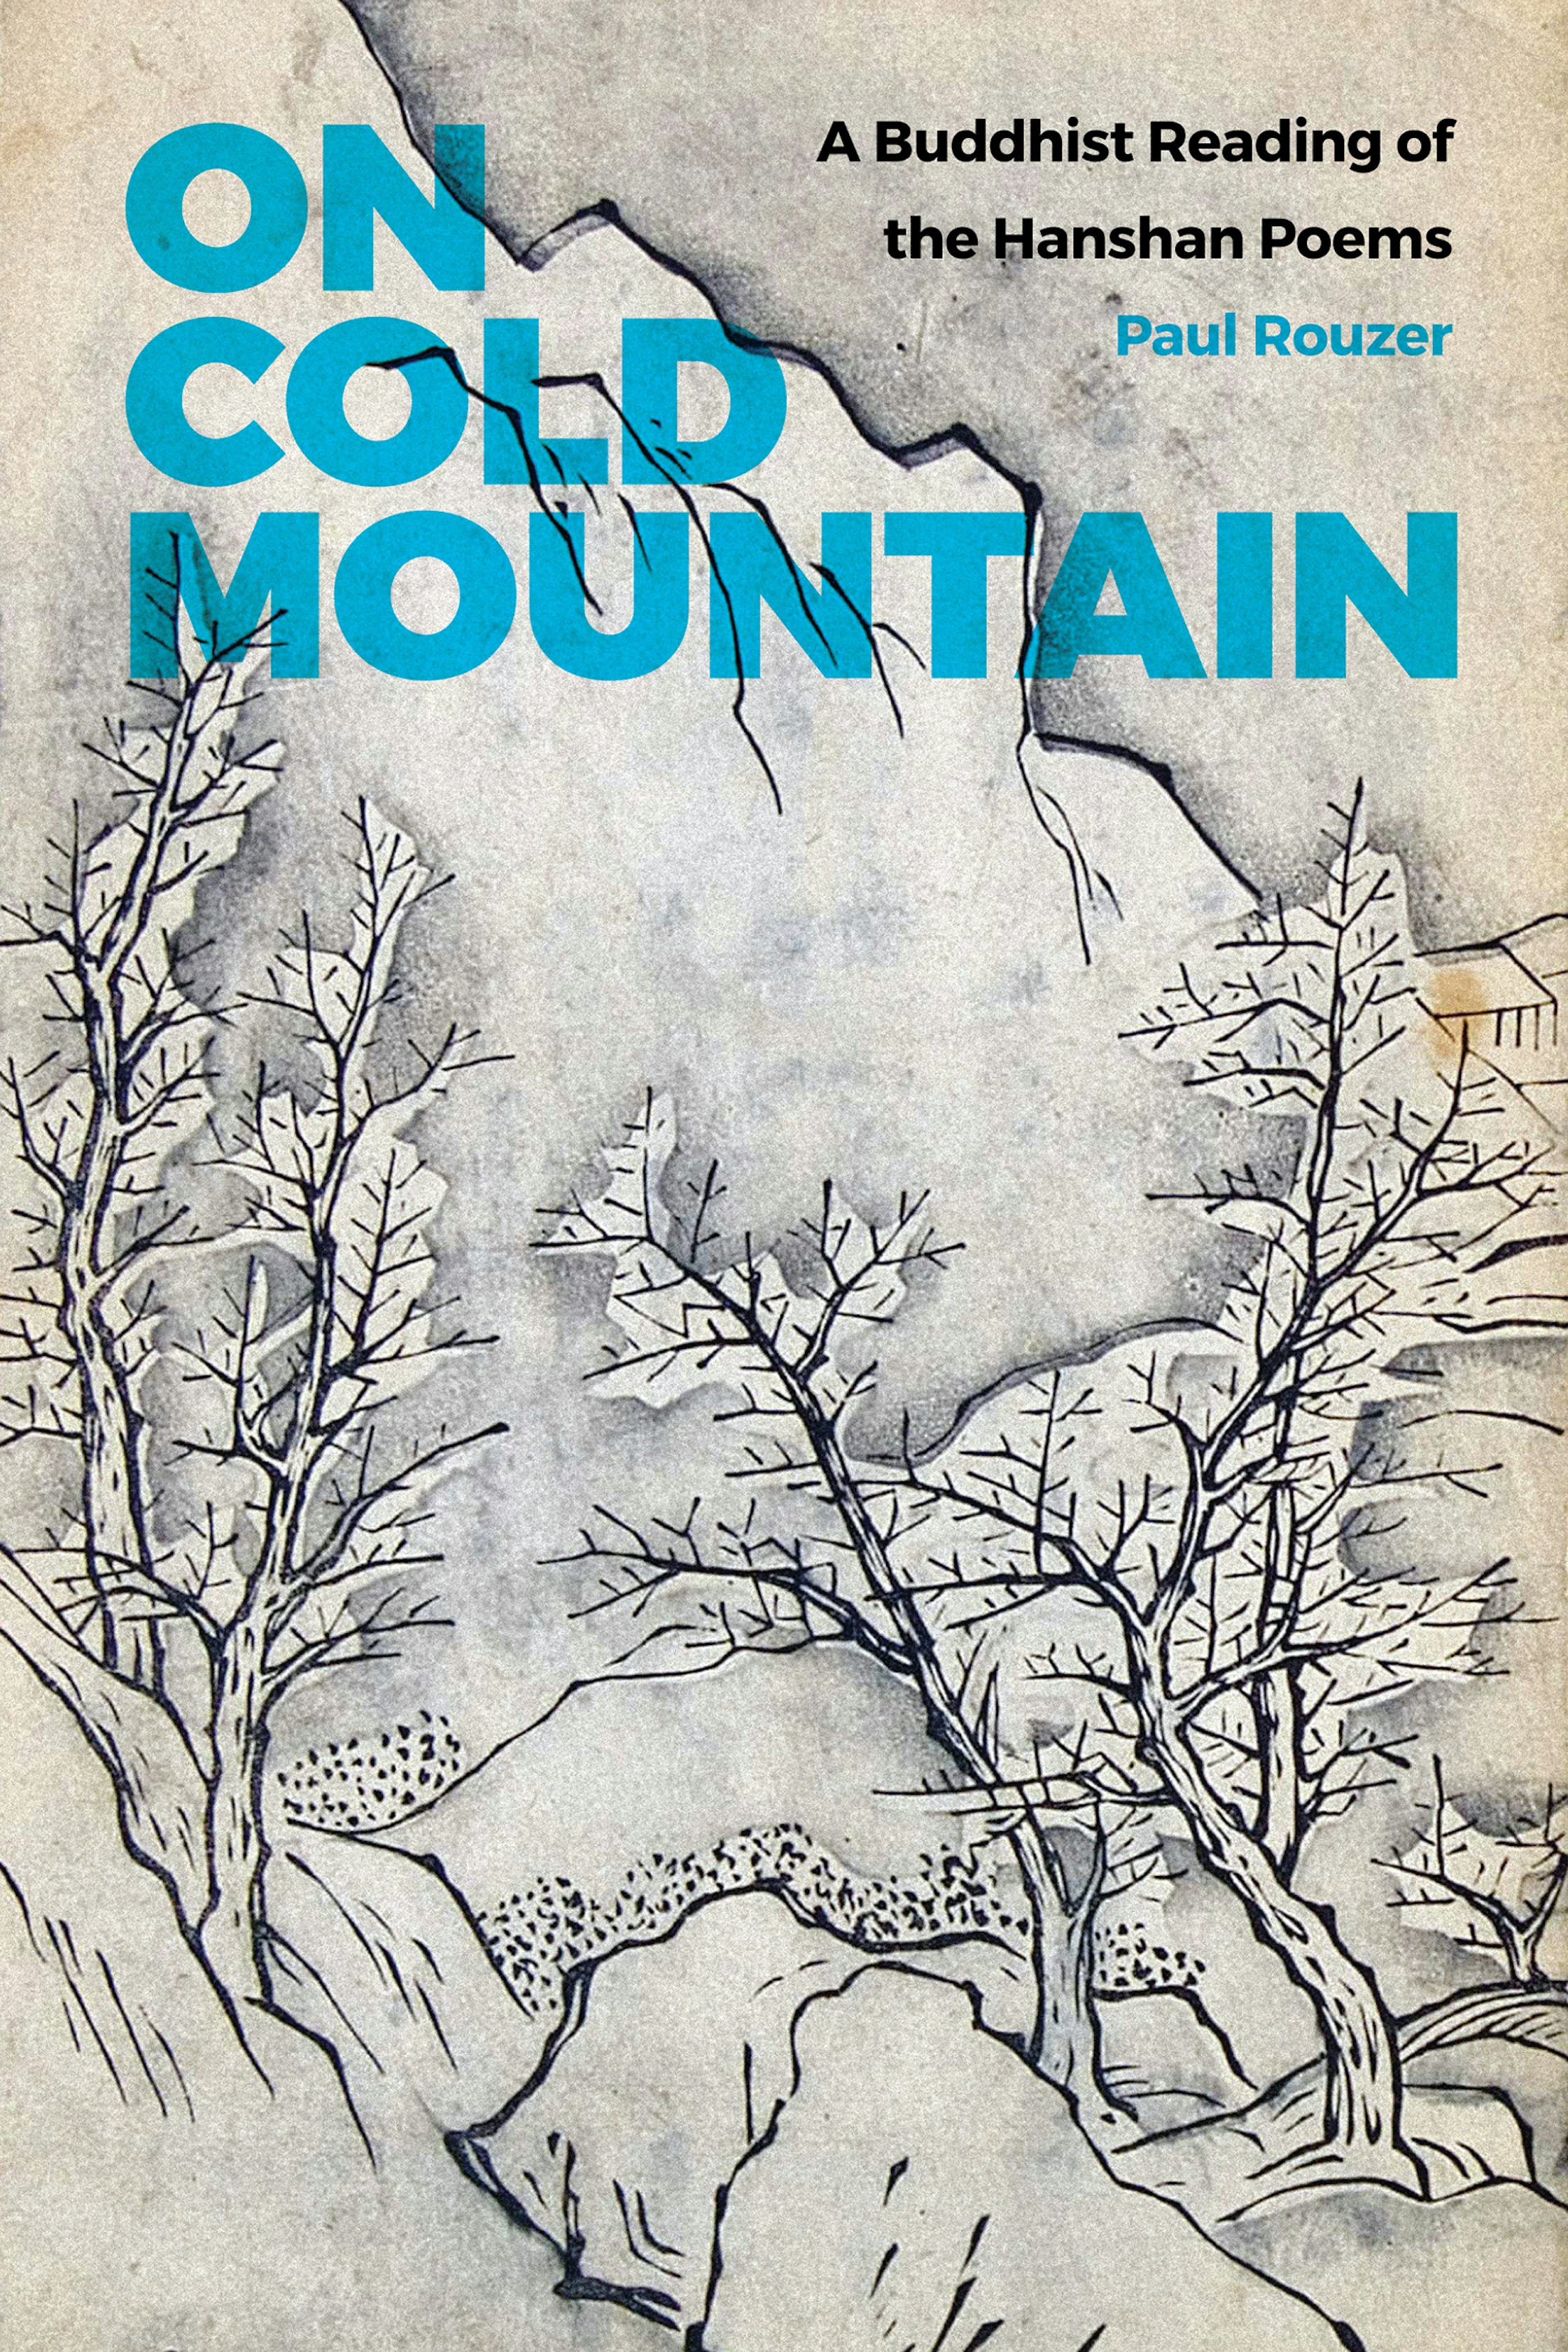 On Cold Mountain